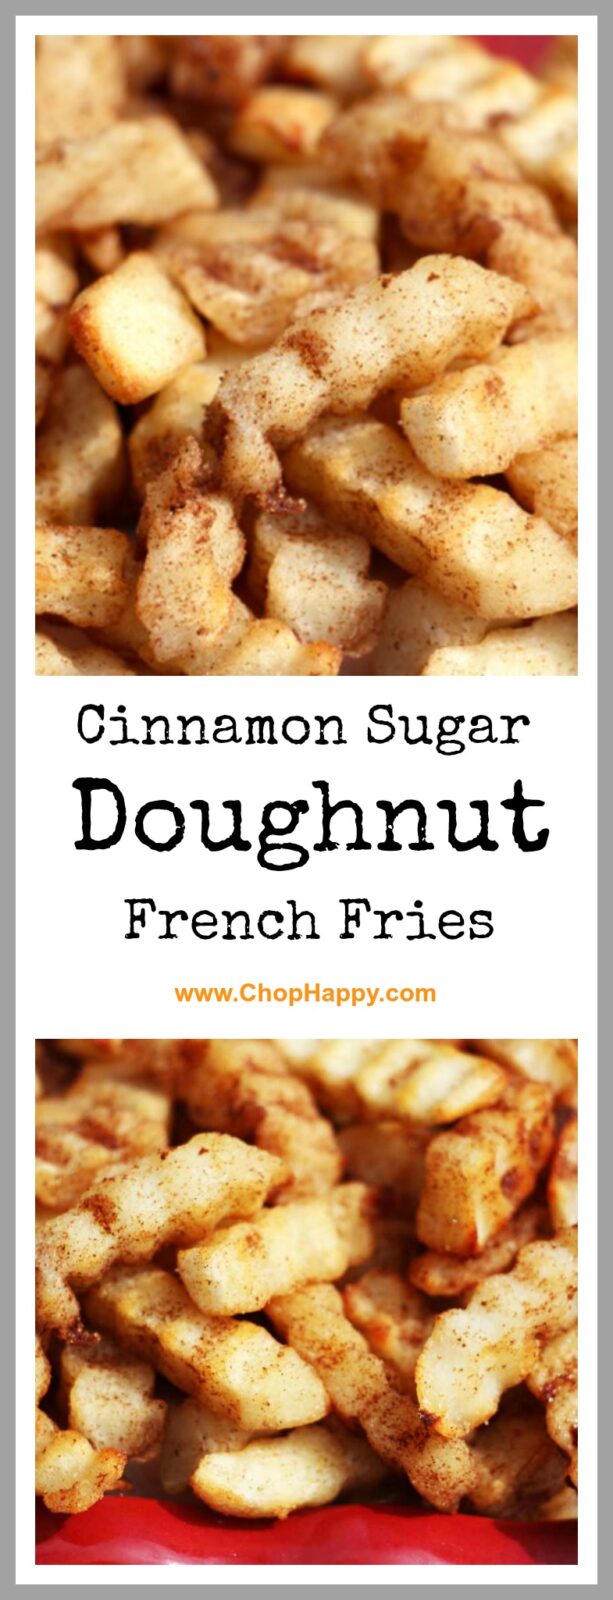 Cinnamon Sugar Doughnut French Fries Recipe - is french fries for dessert. If this is starchy, sweet, and sugary fun for everyone. Also it is super easy because you use store bought frozen fries. www.ChopHappy.com